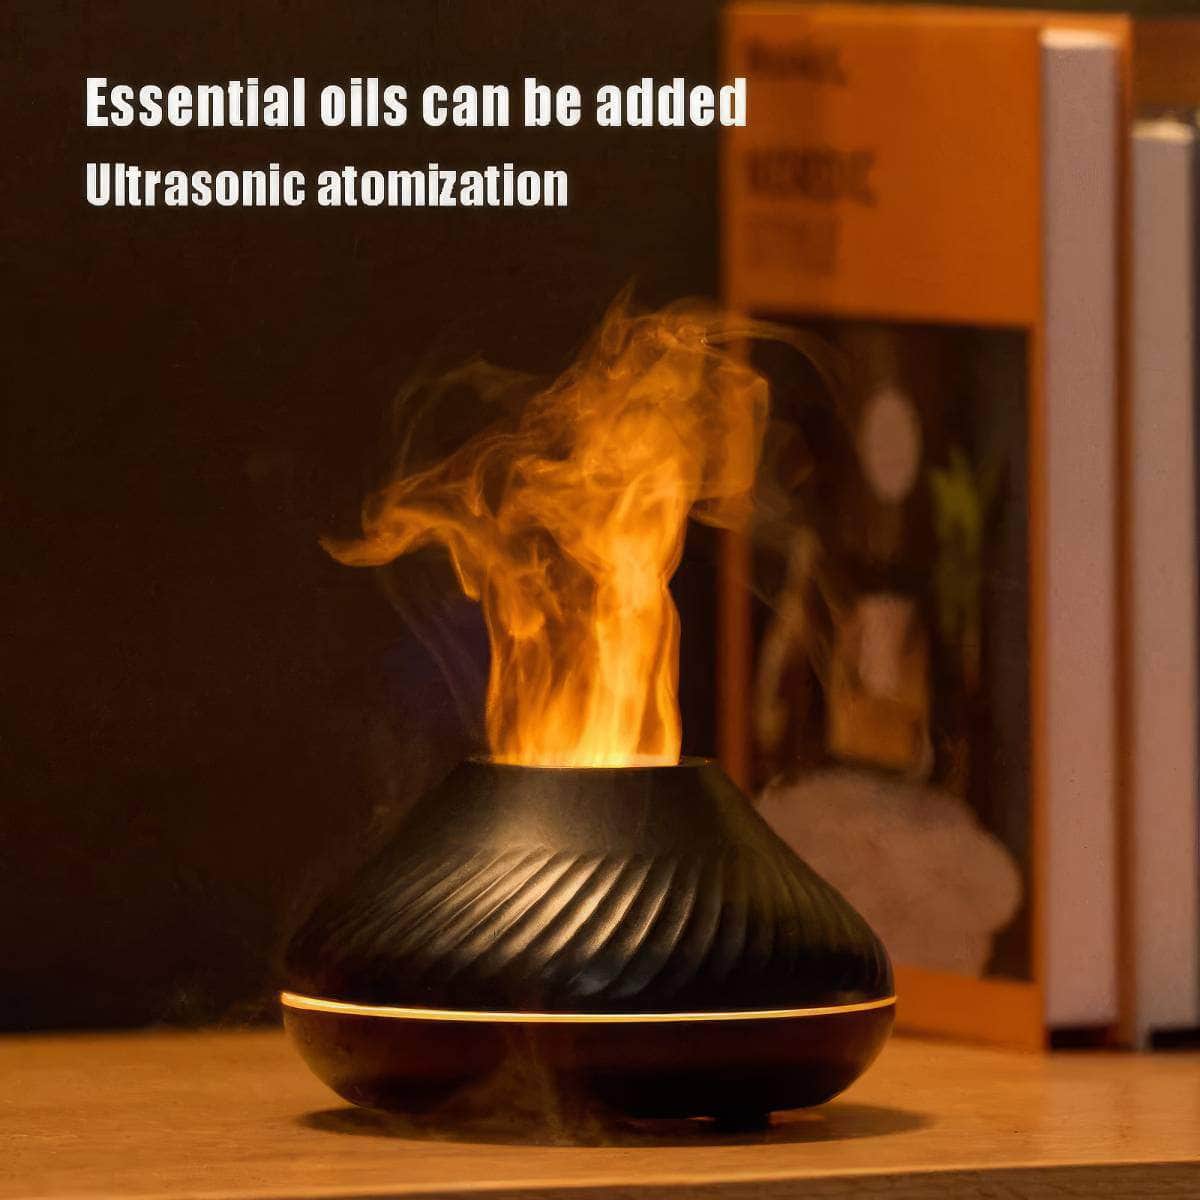 Nordic Style Flame Aromatherapy Humidifier - Desktop Home Atmosphere Light, High-Fog, Quiet, Space-Saving